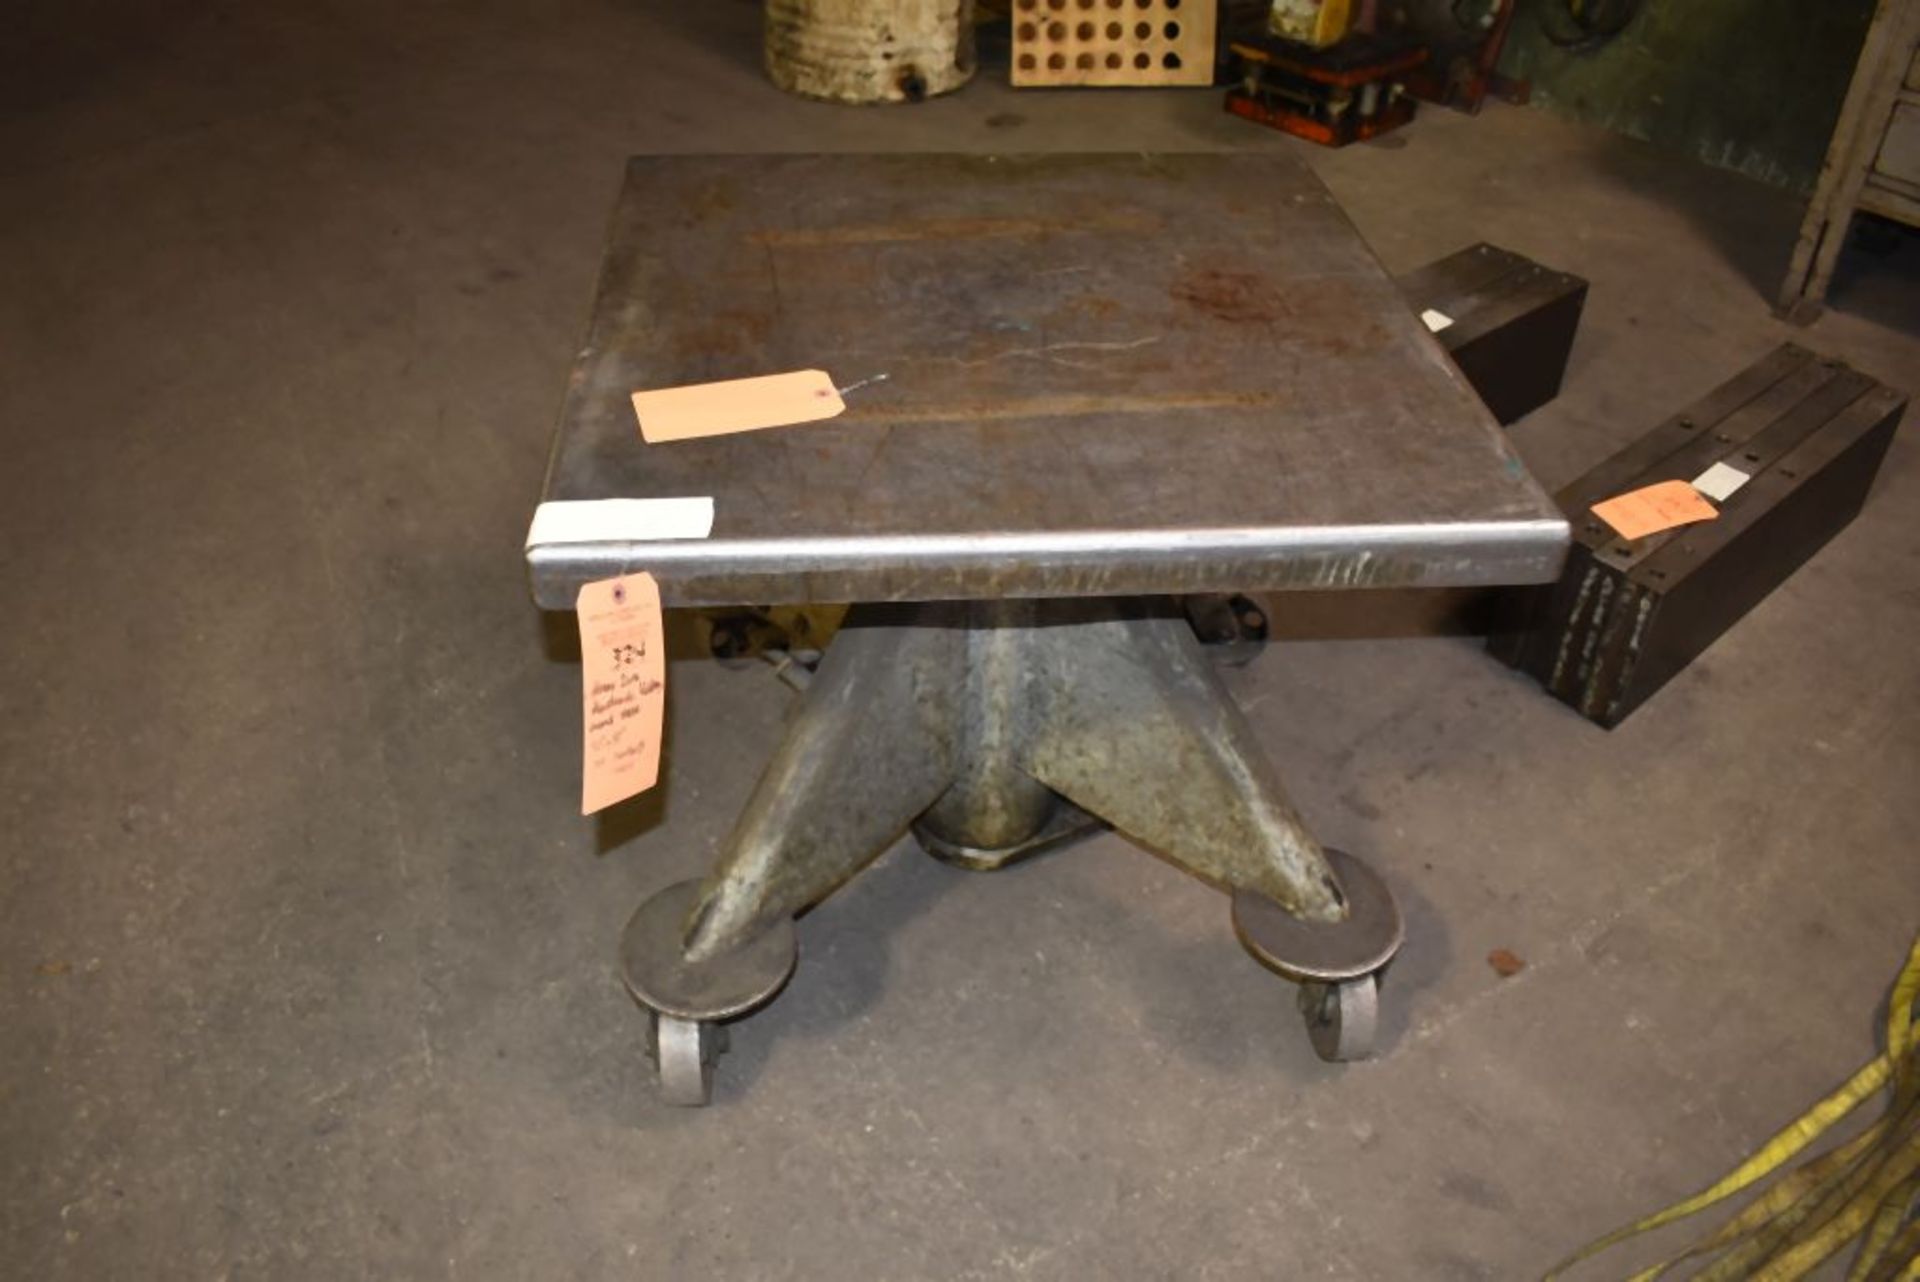 HEAVY DUTY HYDRAULIC ROLLING WORK TABLE, 30" x 30", NO CONTENTS - Image 2 of 4